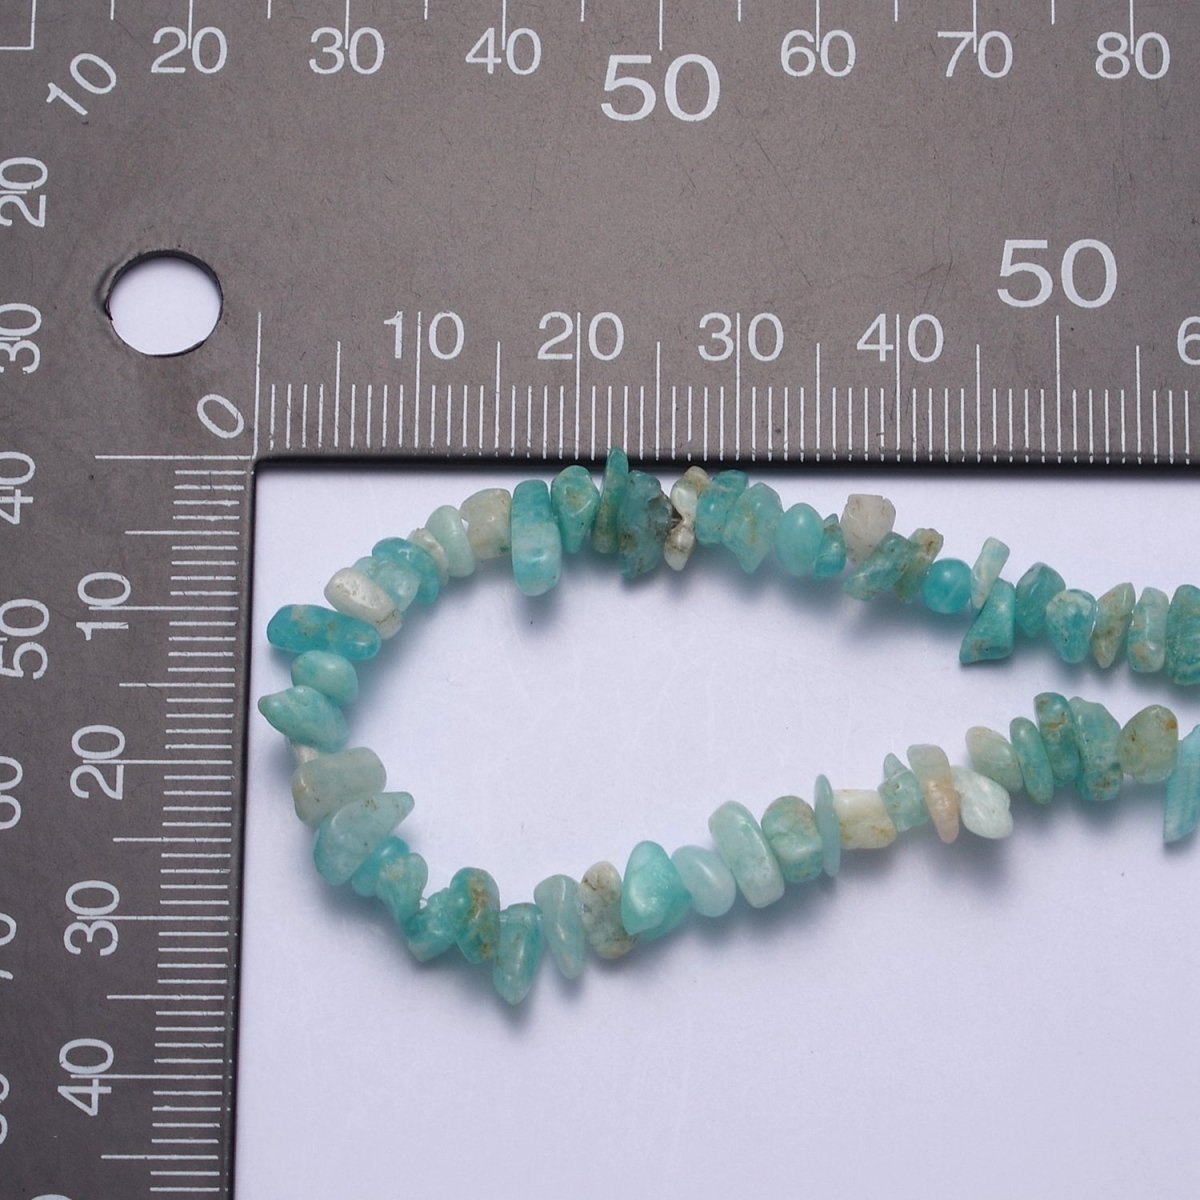 Amazonite Beaded Necklace - Chip Necklace Healing Crystals, Gemstone Necklace, Handmade Jewelry, Crystal Necklace | WA-648 Clearance Pricing - DLUXCA